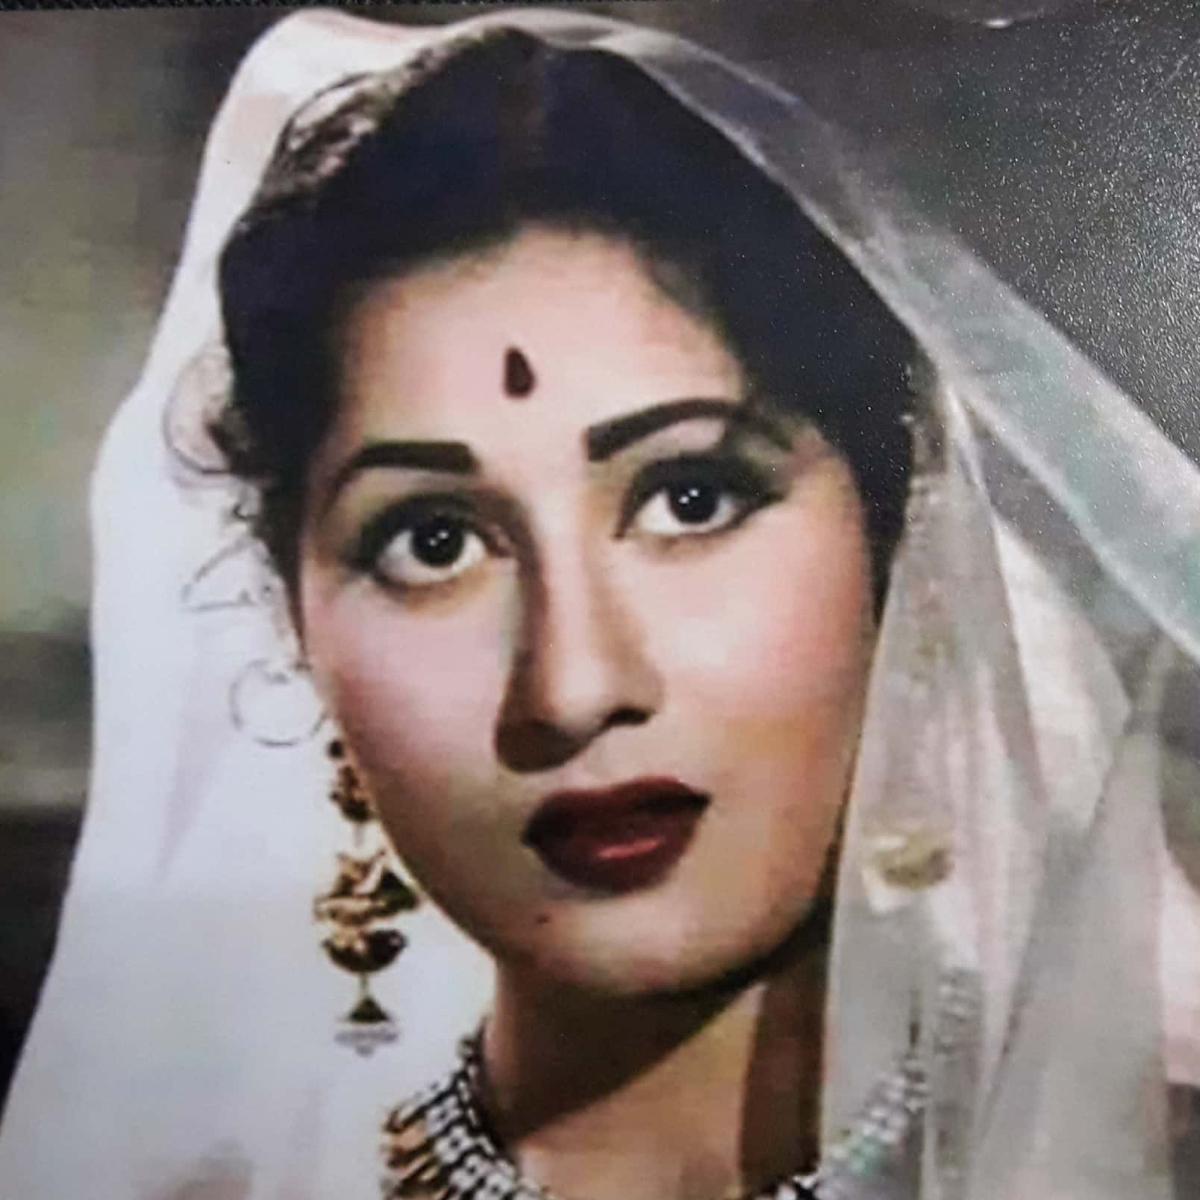 Exclusive: Madhubala's younger sister Madhur Brij Bhushan: She was a courageous girl who never gave up on life